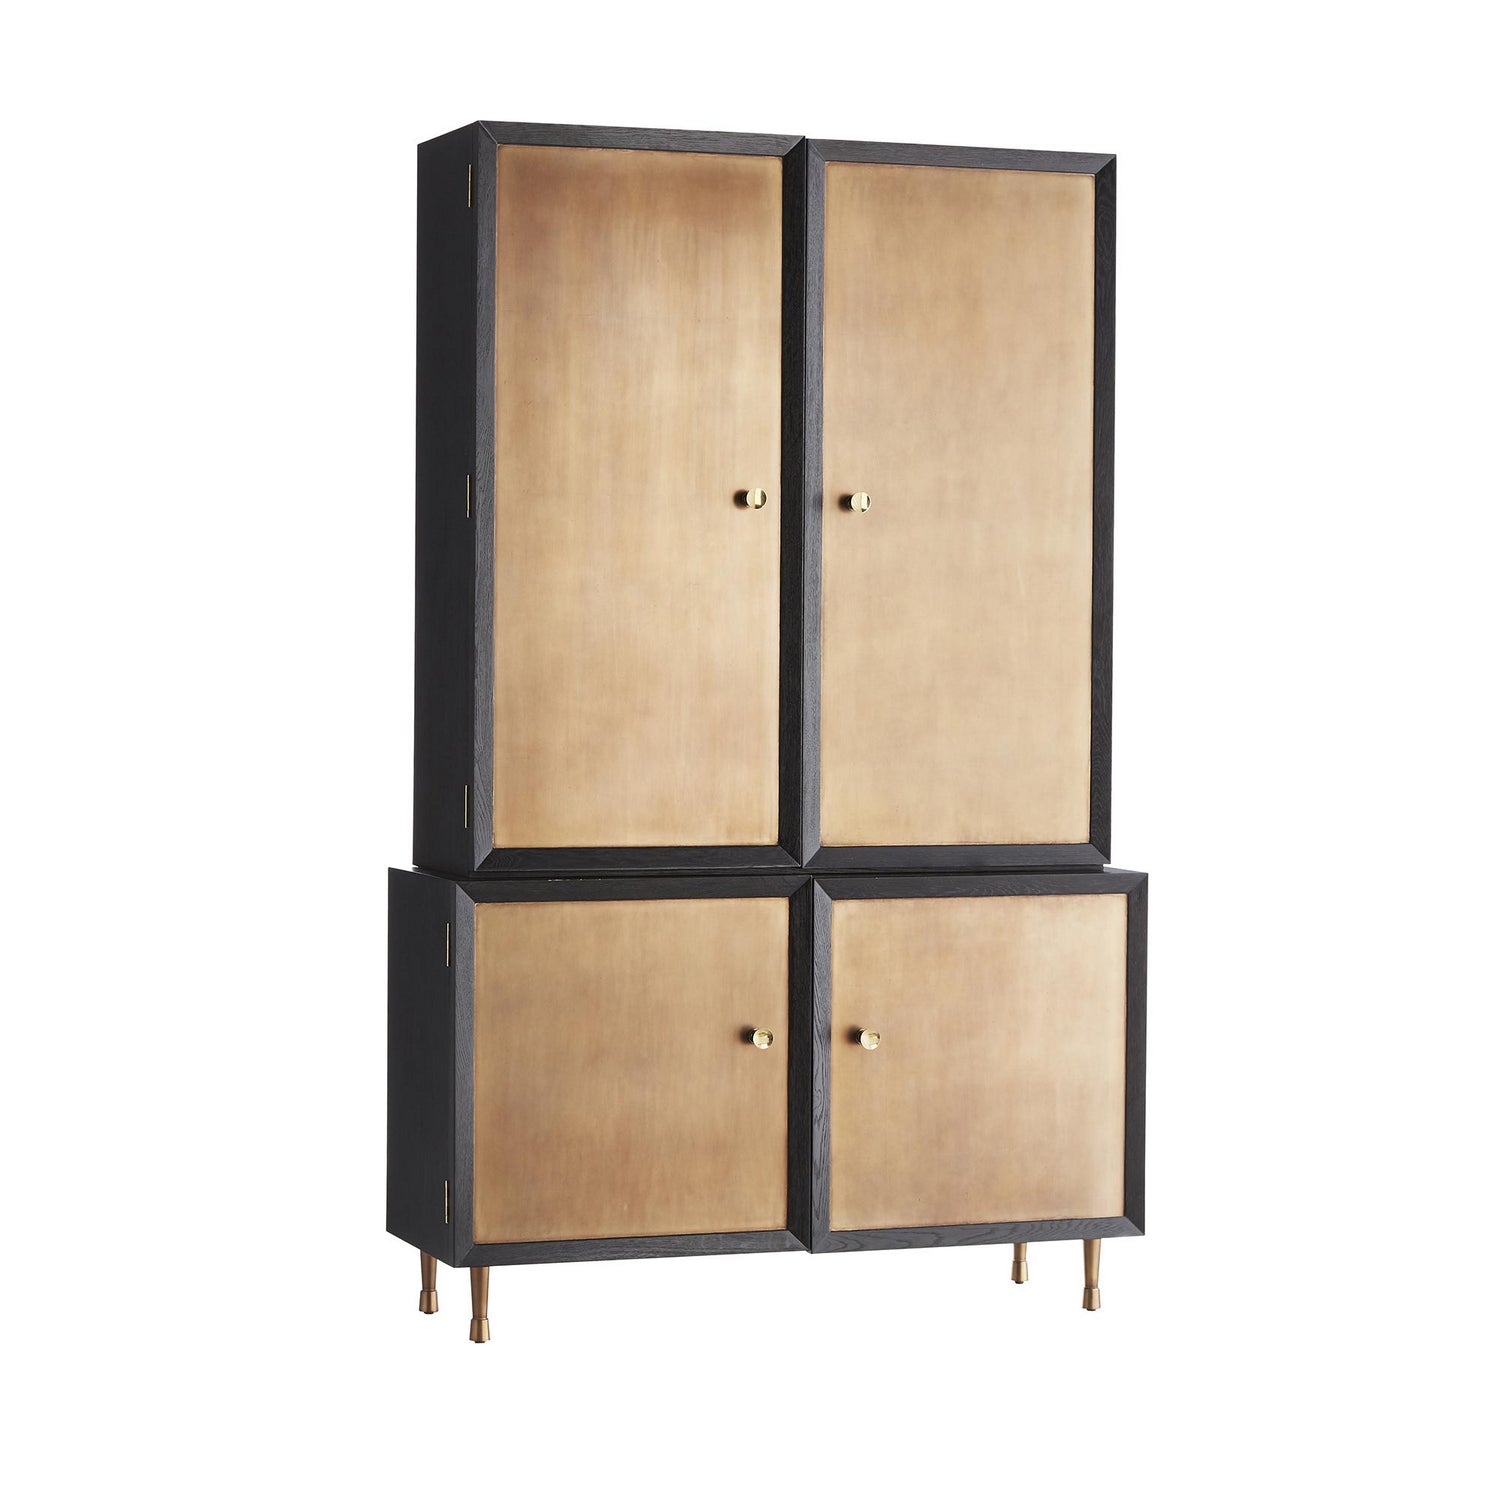 Cabinet from the Kilpatrick collection in Ebony finish